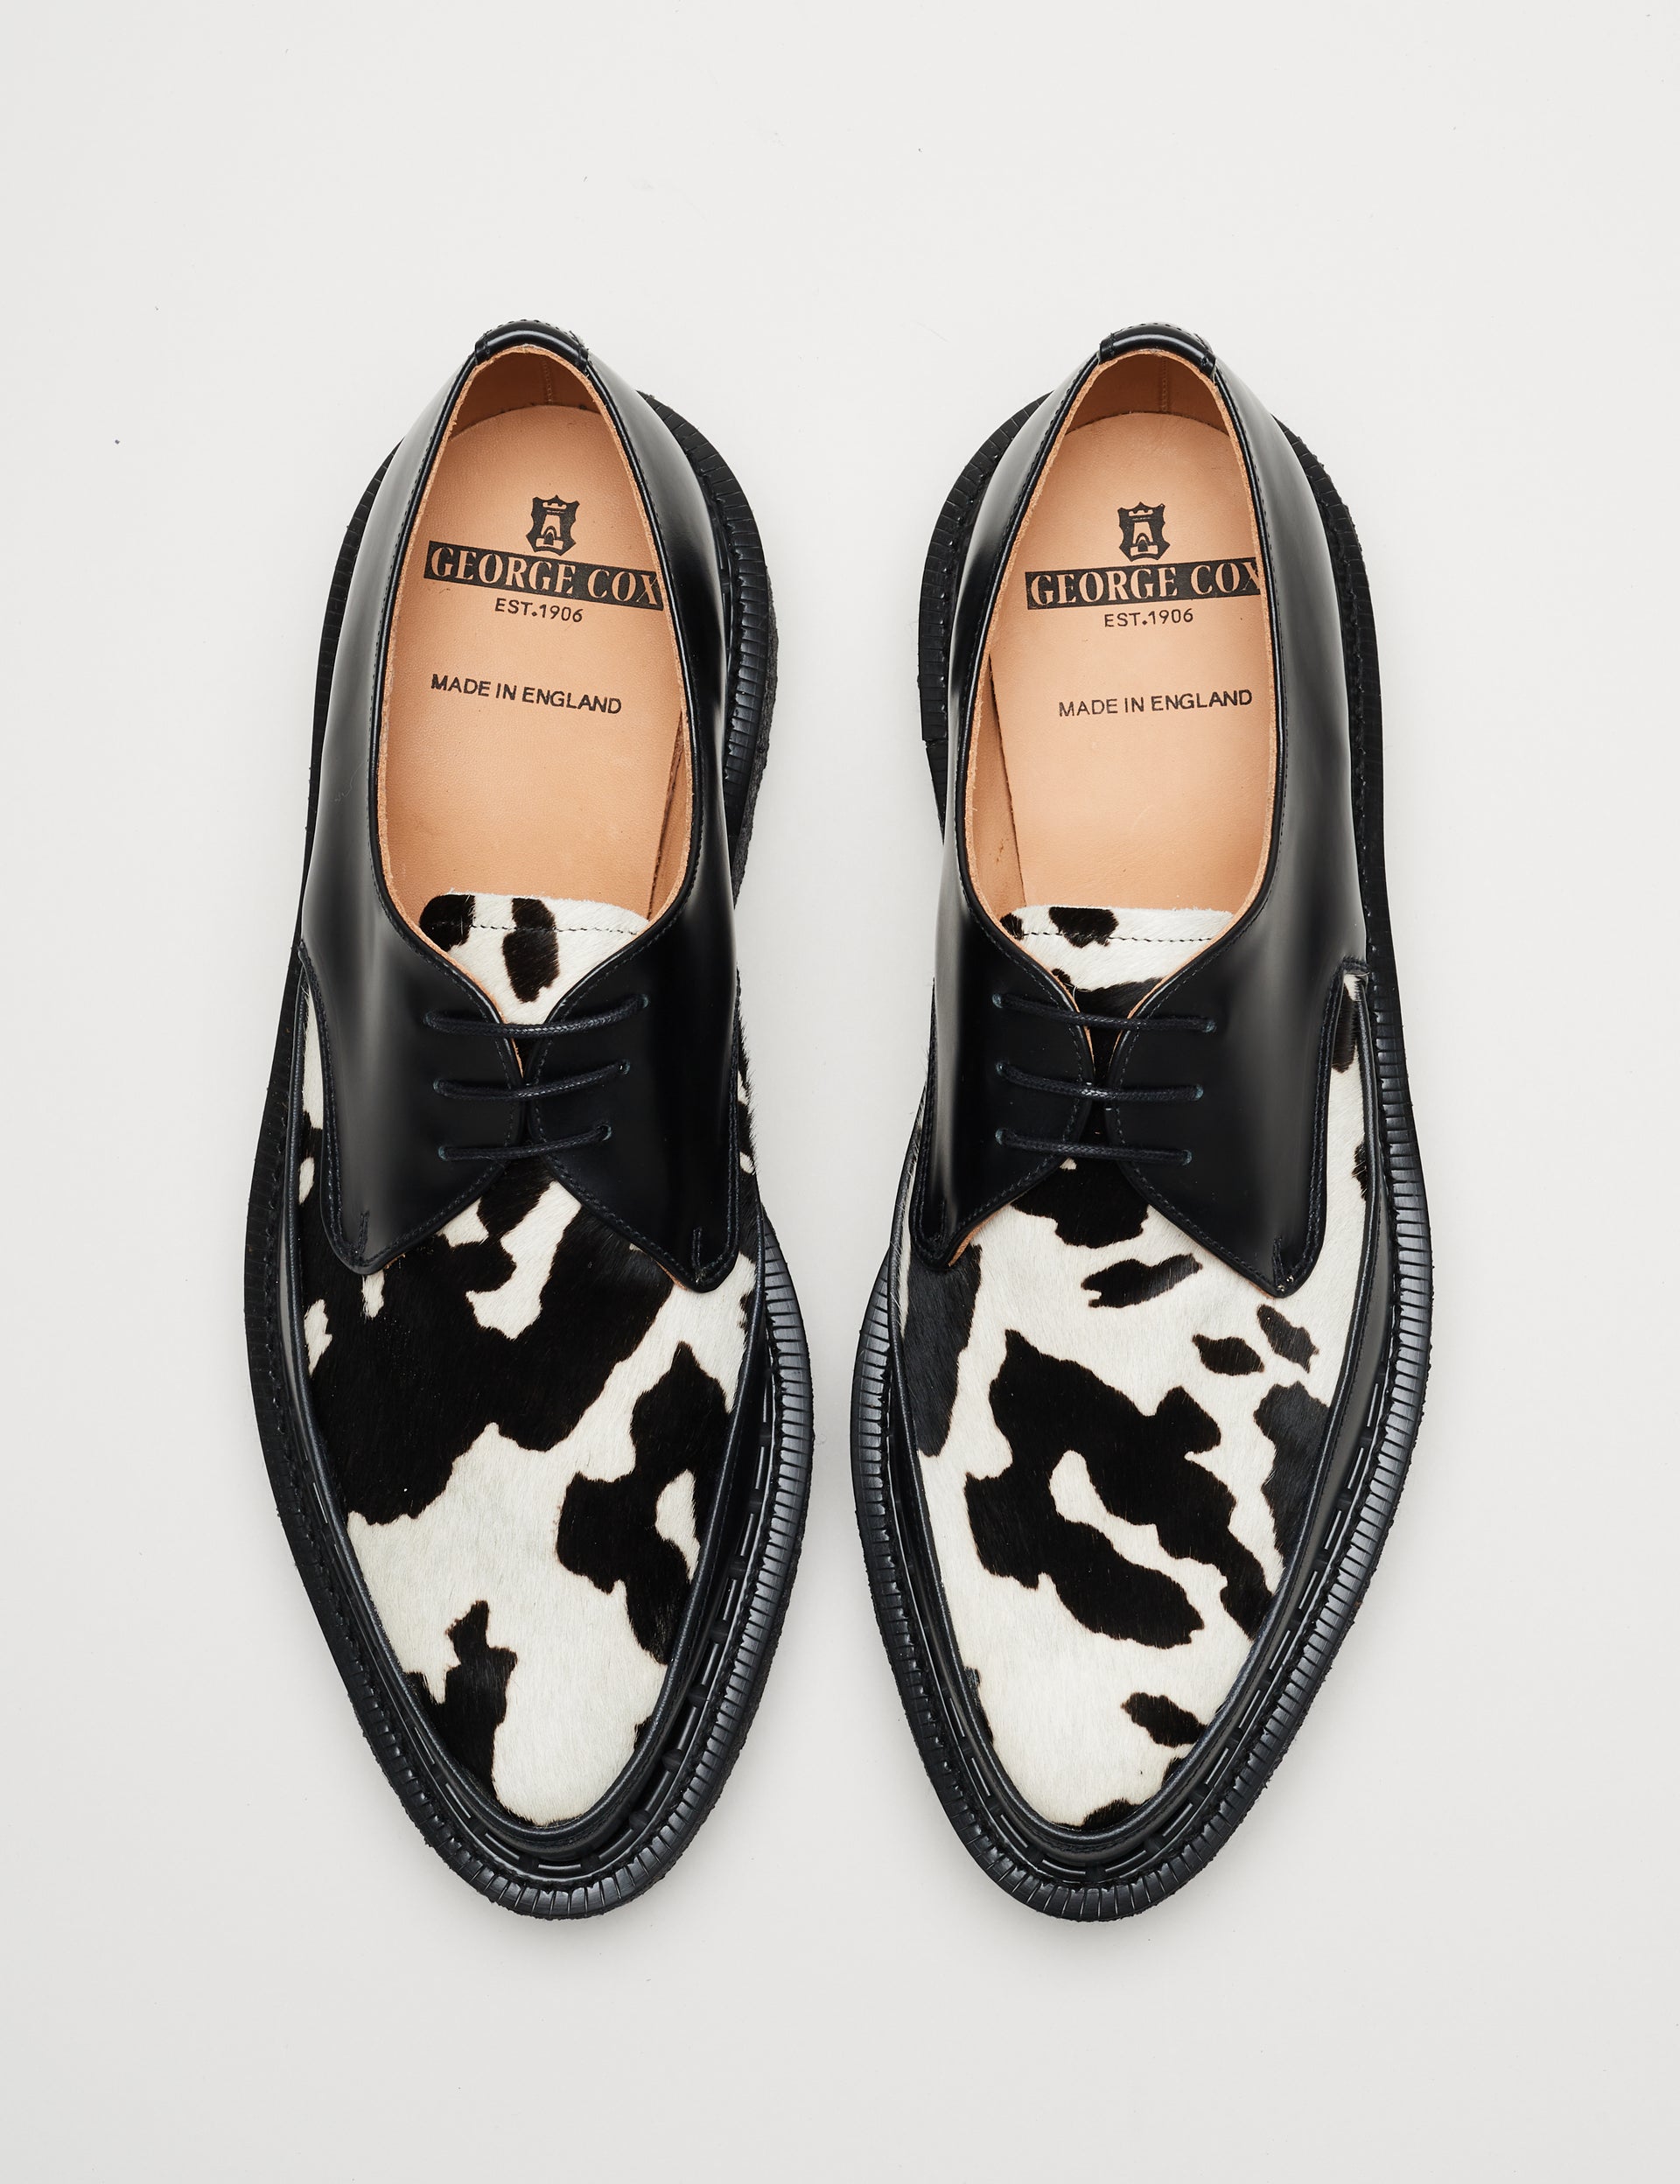 Diano Black/Cow